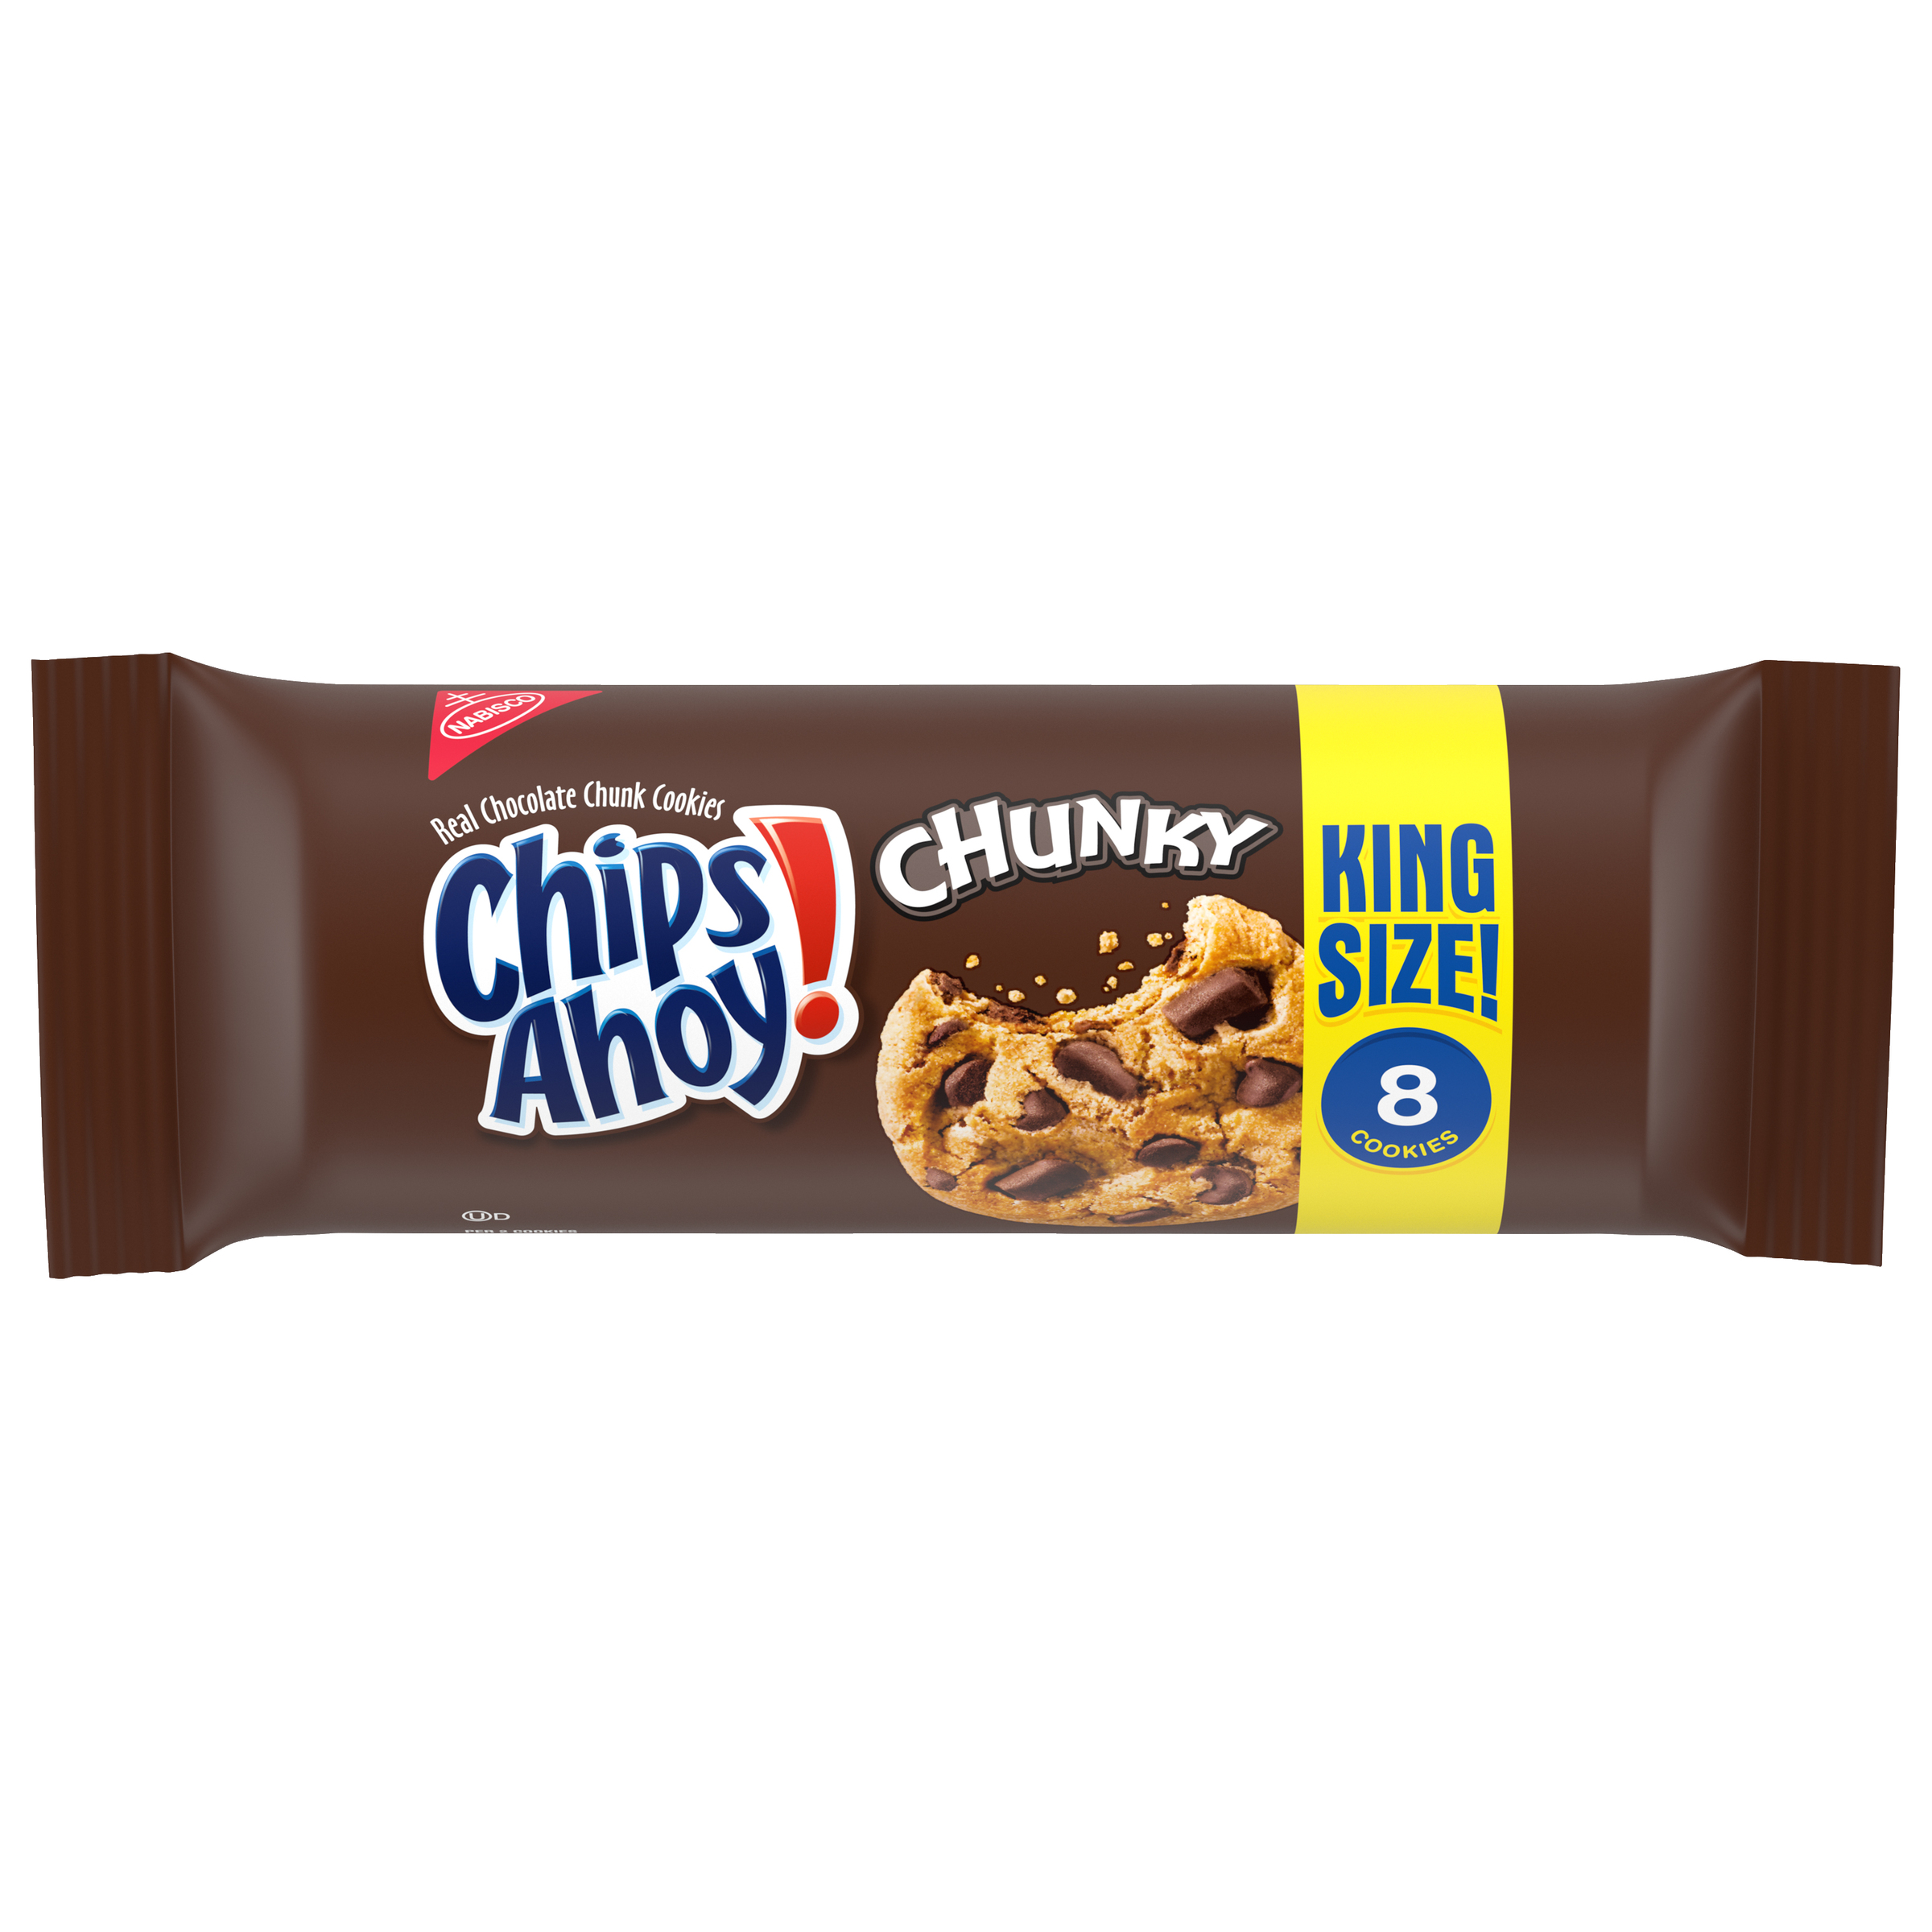 CHIPS AHOY! Chunky Chocolate Chip Cookies, King Size (4.15oz)